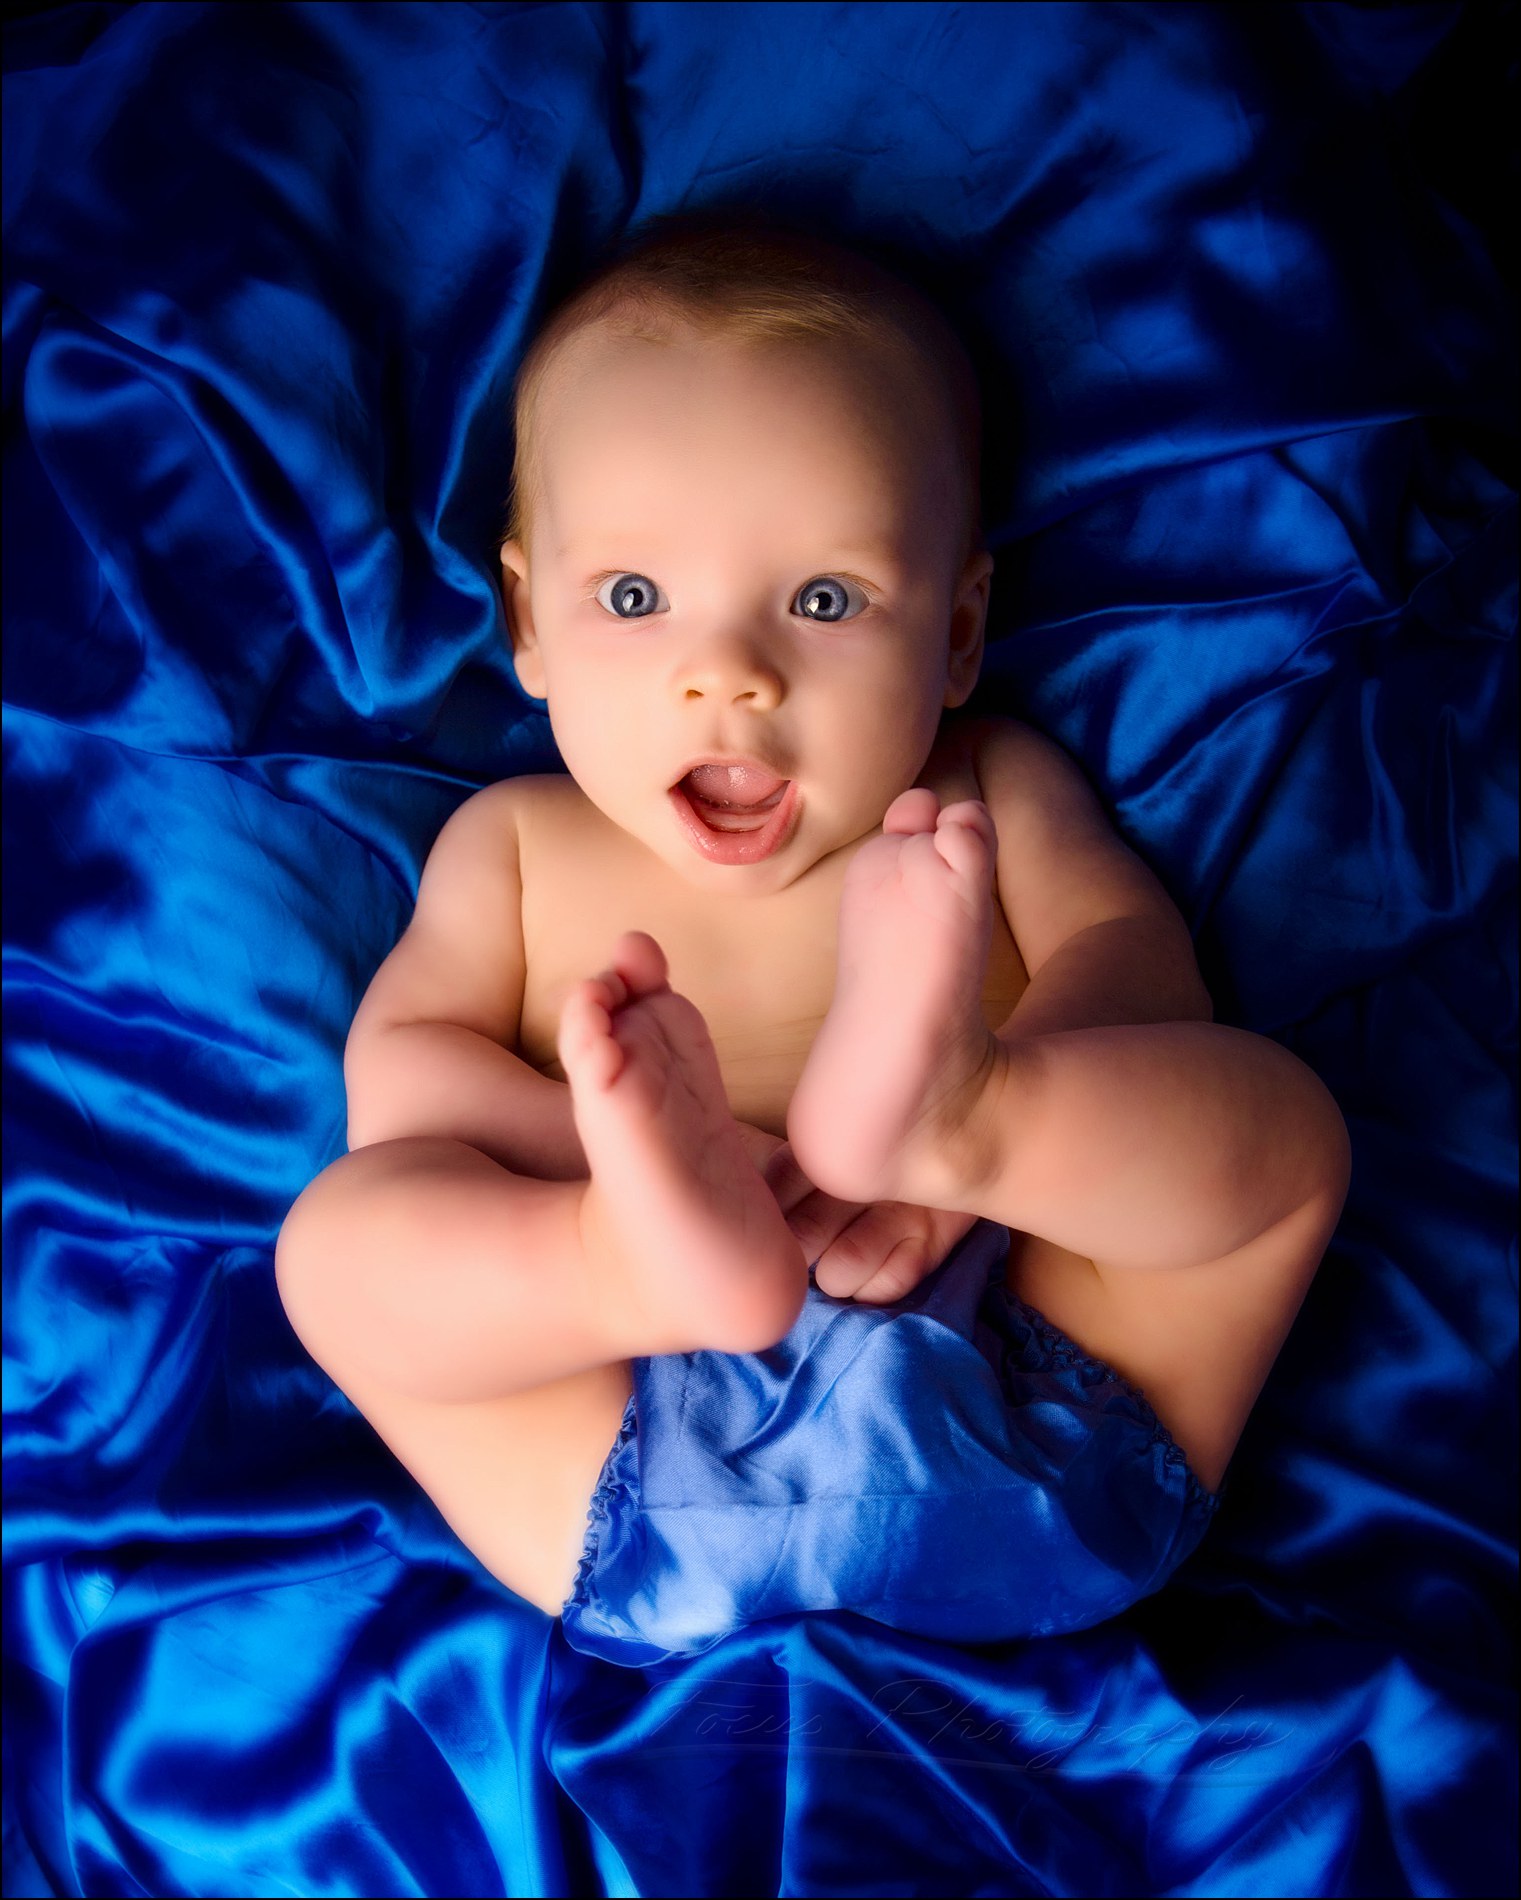 baby boy in blue diaper cover looks up at camera